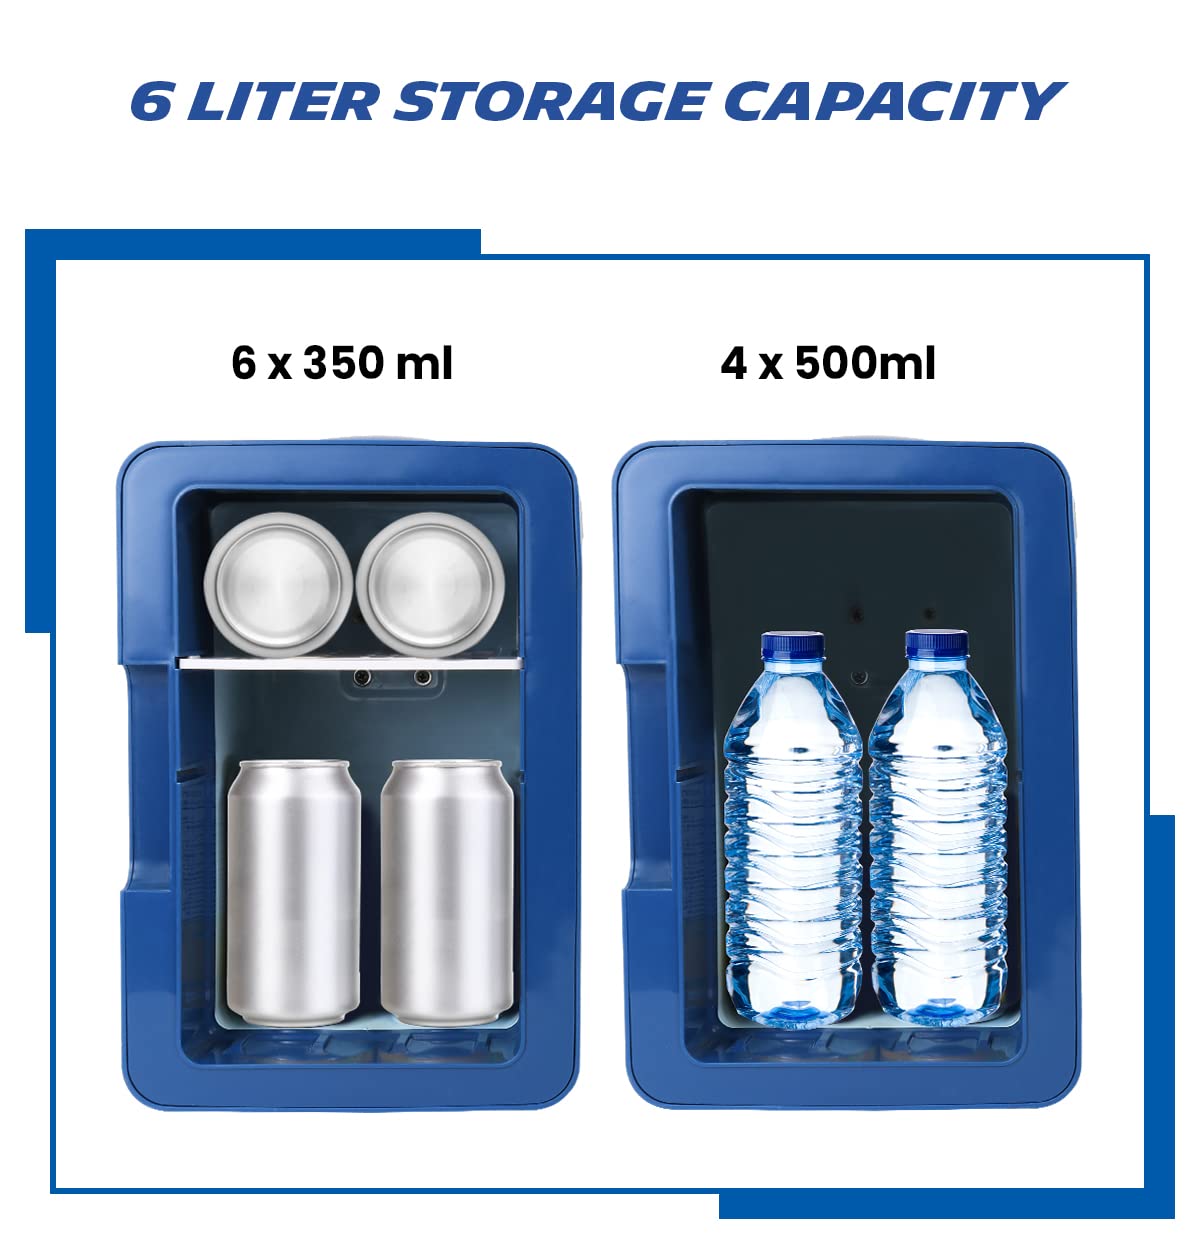 MICHELIN Portable 6 Can Mini Fridge, LED Lighted Door, 6L (6.3 qt) Capacity, Blue, Travel Cooler with 12V DC and AC Power Cords, Compact Refrigerator for Home, Office, Dorm, Garage, Workshop, Truck